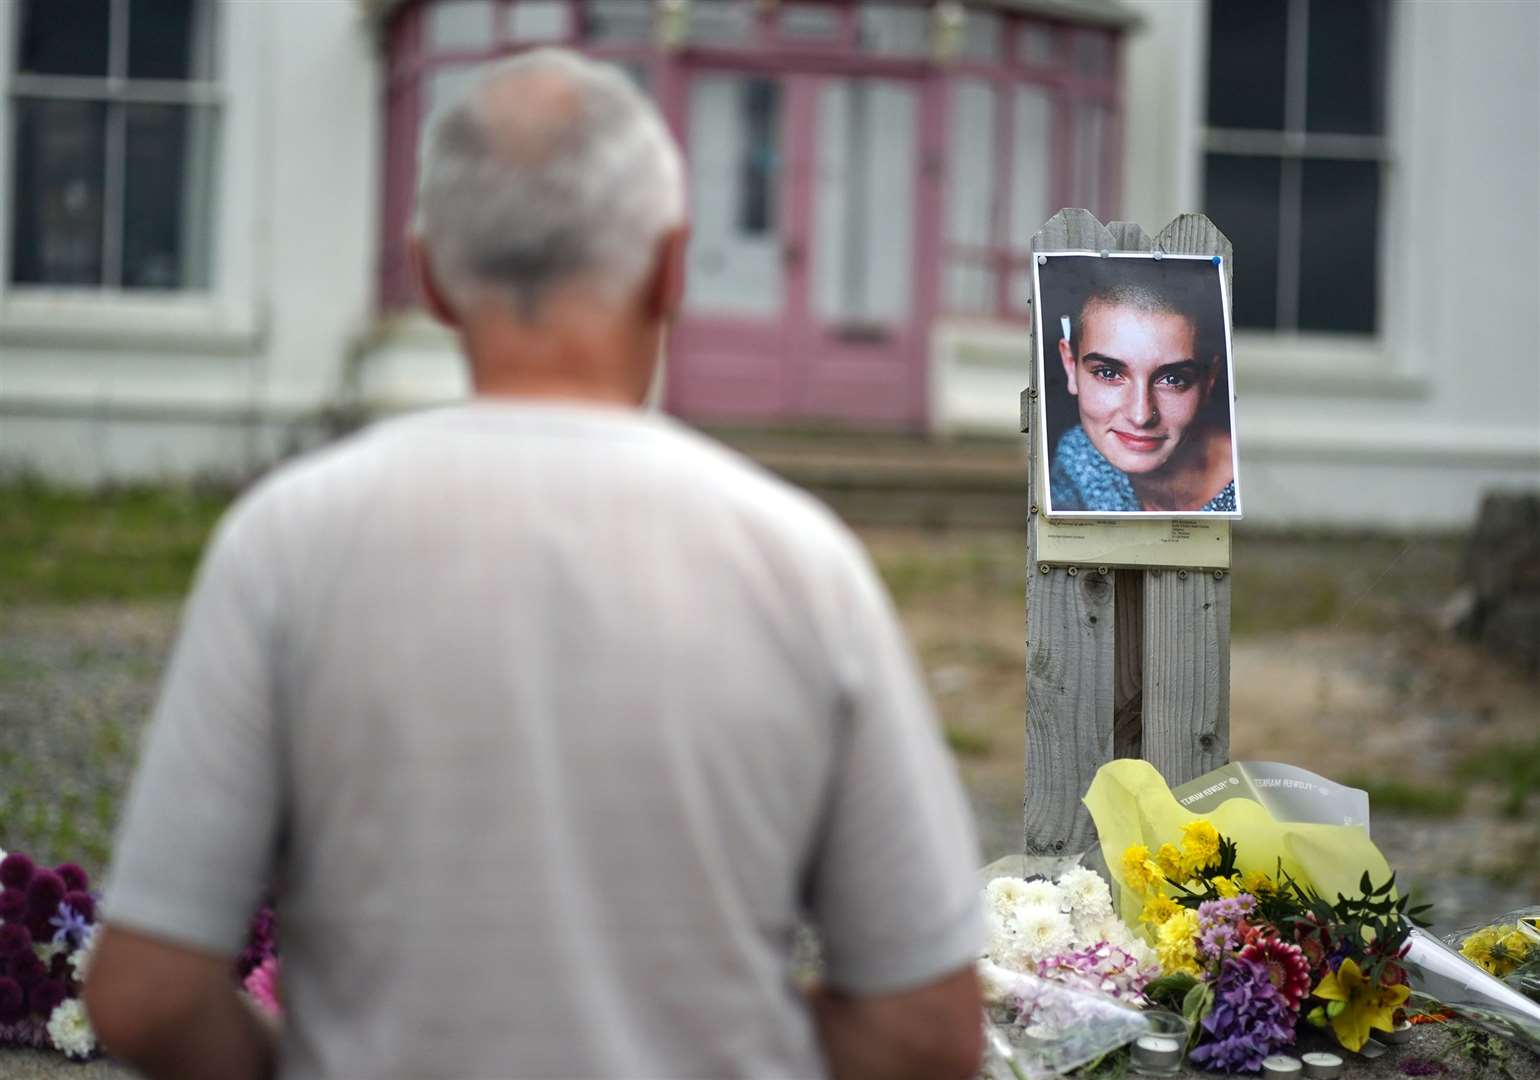 Floral tributes laid outside Sinead O’Connor’s former home in Bray, Co Wicklow (Brian Lawless/PA)